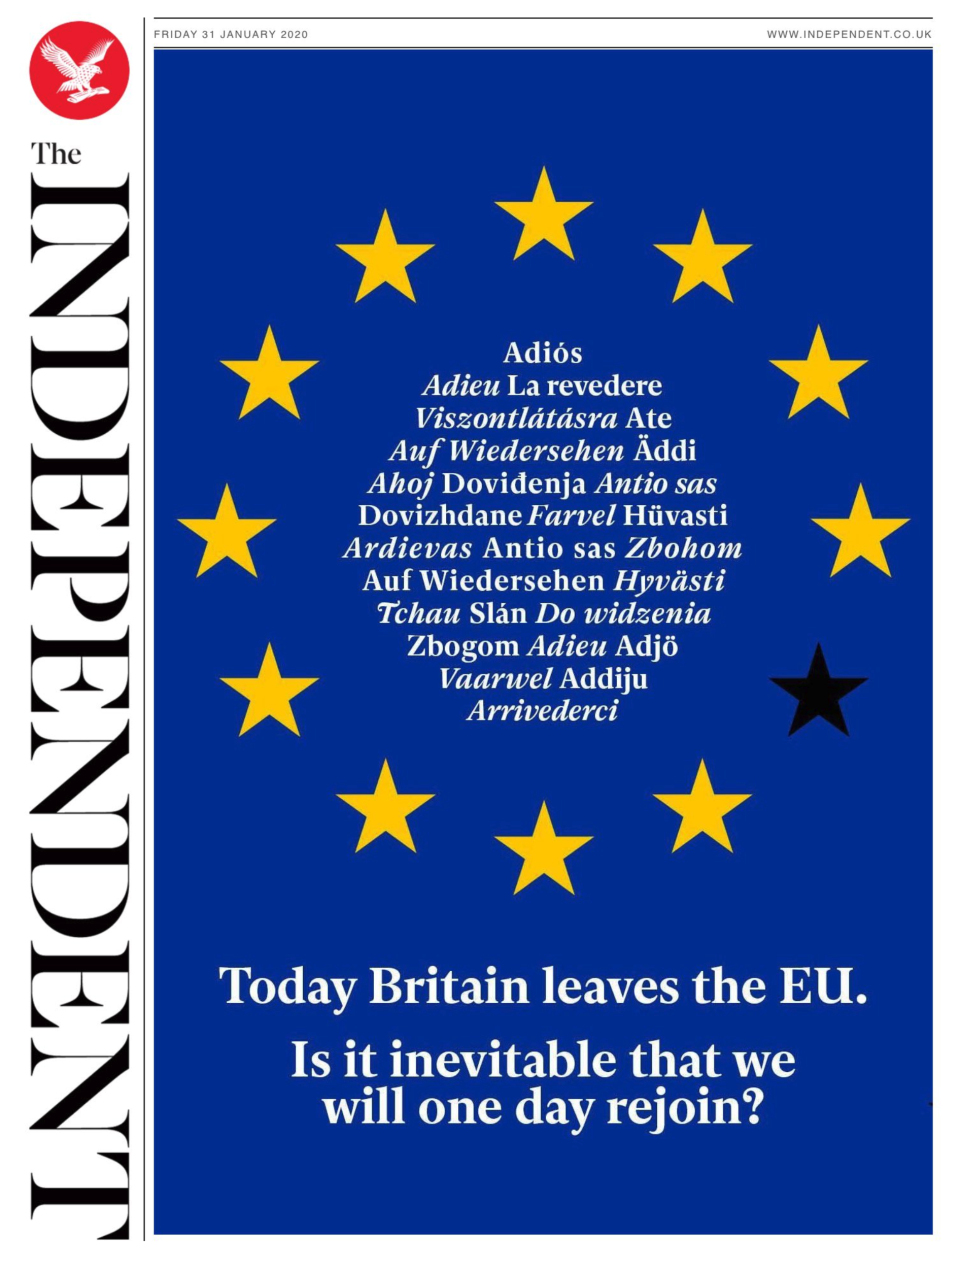 The Independent featured the EU flag with one of the stars coloured black, surrounding a circle of European words for "goodbye" and asks if rejoining is inevitable.